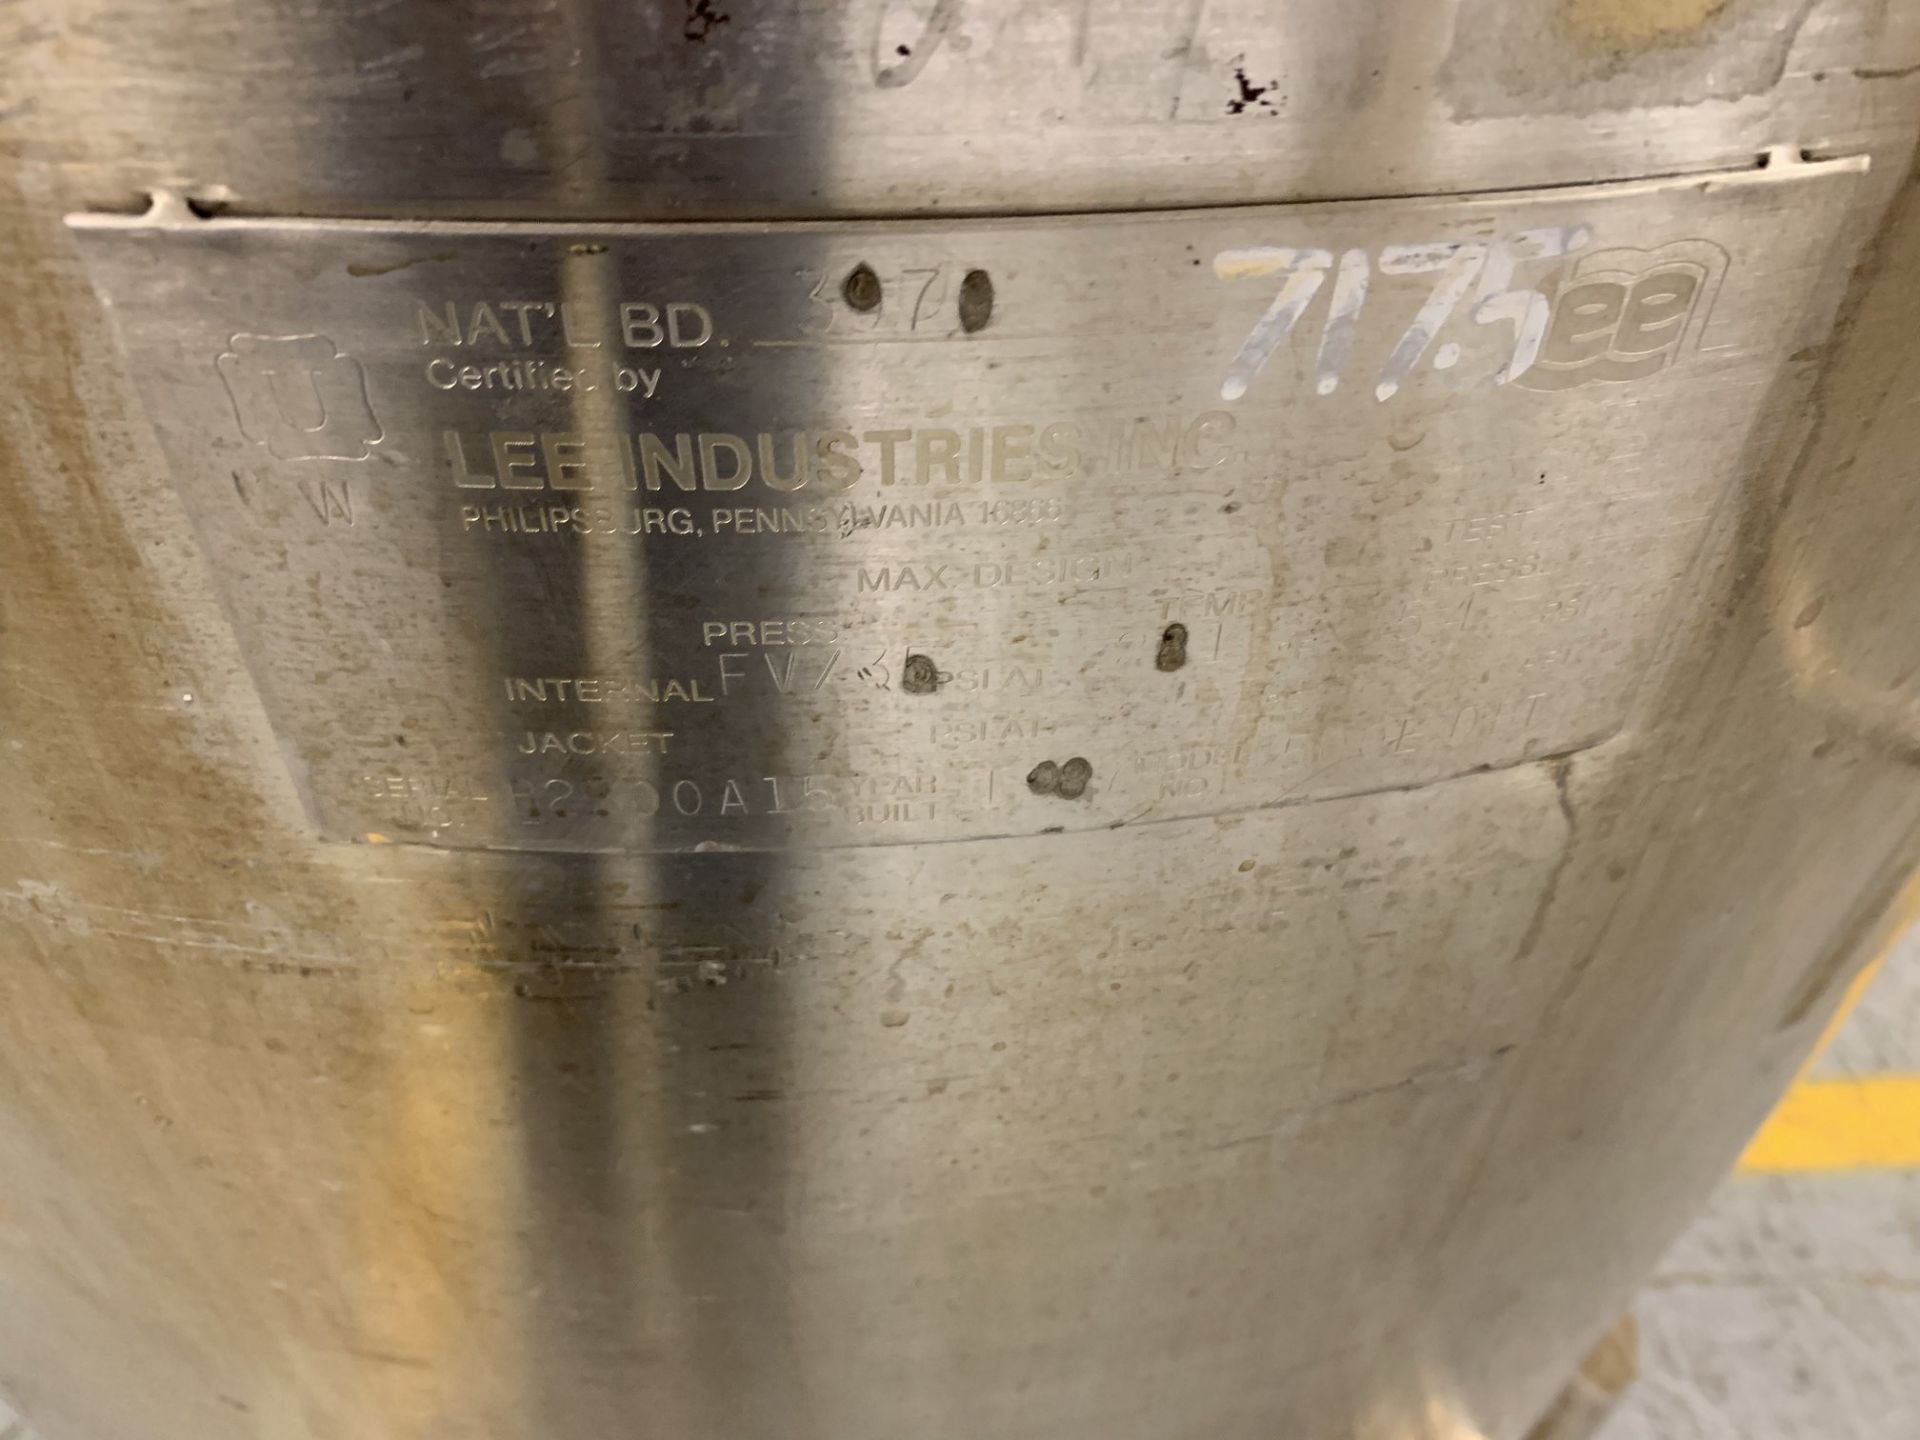 Lot # 56 - Lee 500LDBT 500 Liter Stainless Steel Pressure Vessel, Propellor agitator without - Image 3 of 3